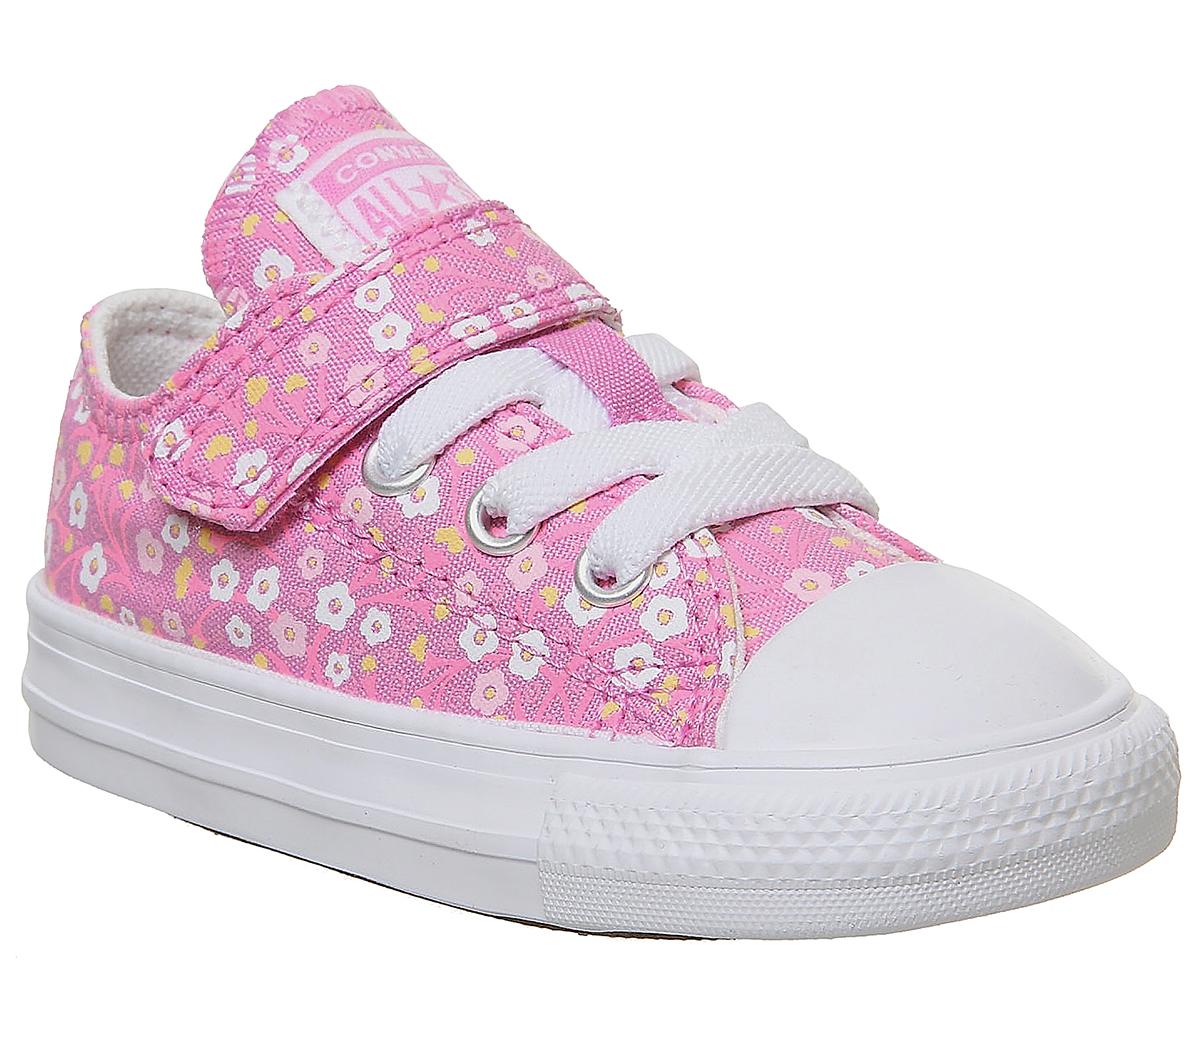 ConverseAll Star Low 1vlace TrainersPeony Pink Topaz Gold White Floral